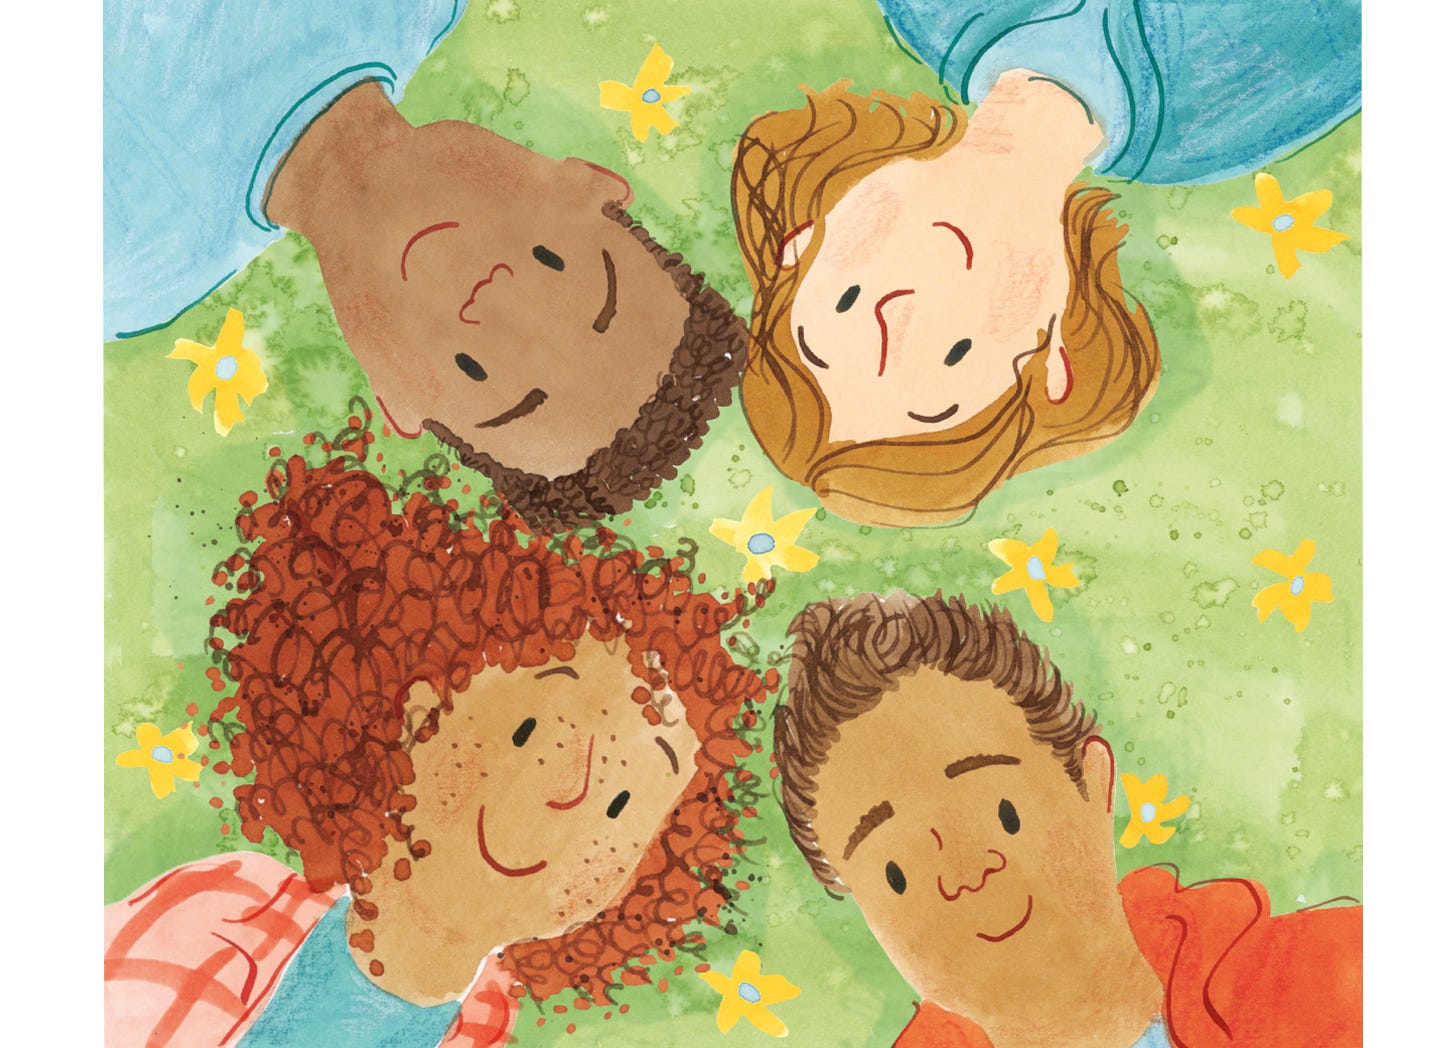 Illustration of four young adults lying in grass and flowers looking up at the sky. Illustration by Nanette Regan from It's Your Time to Shine by Dianne White